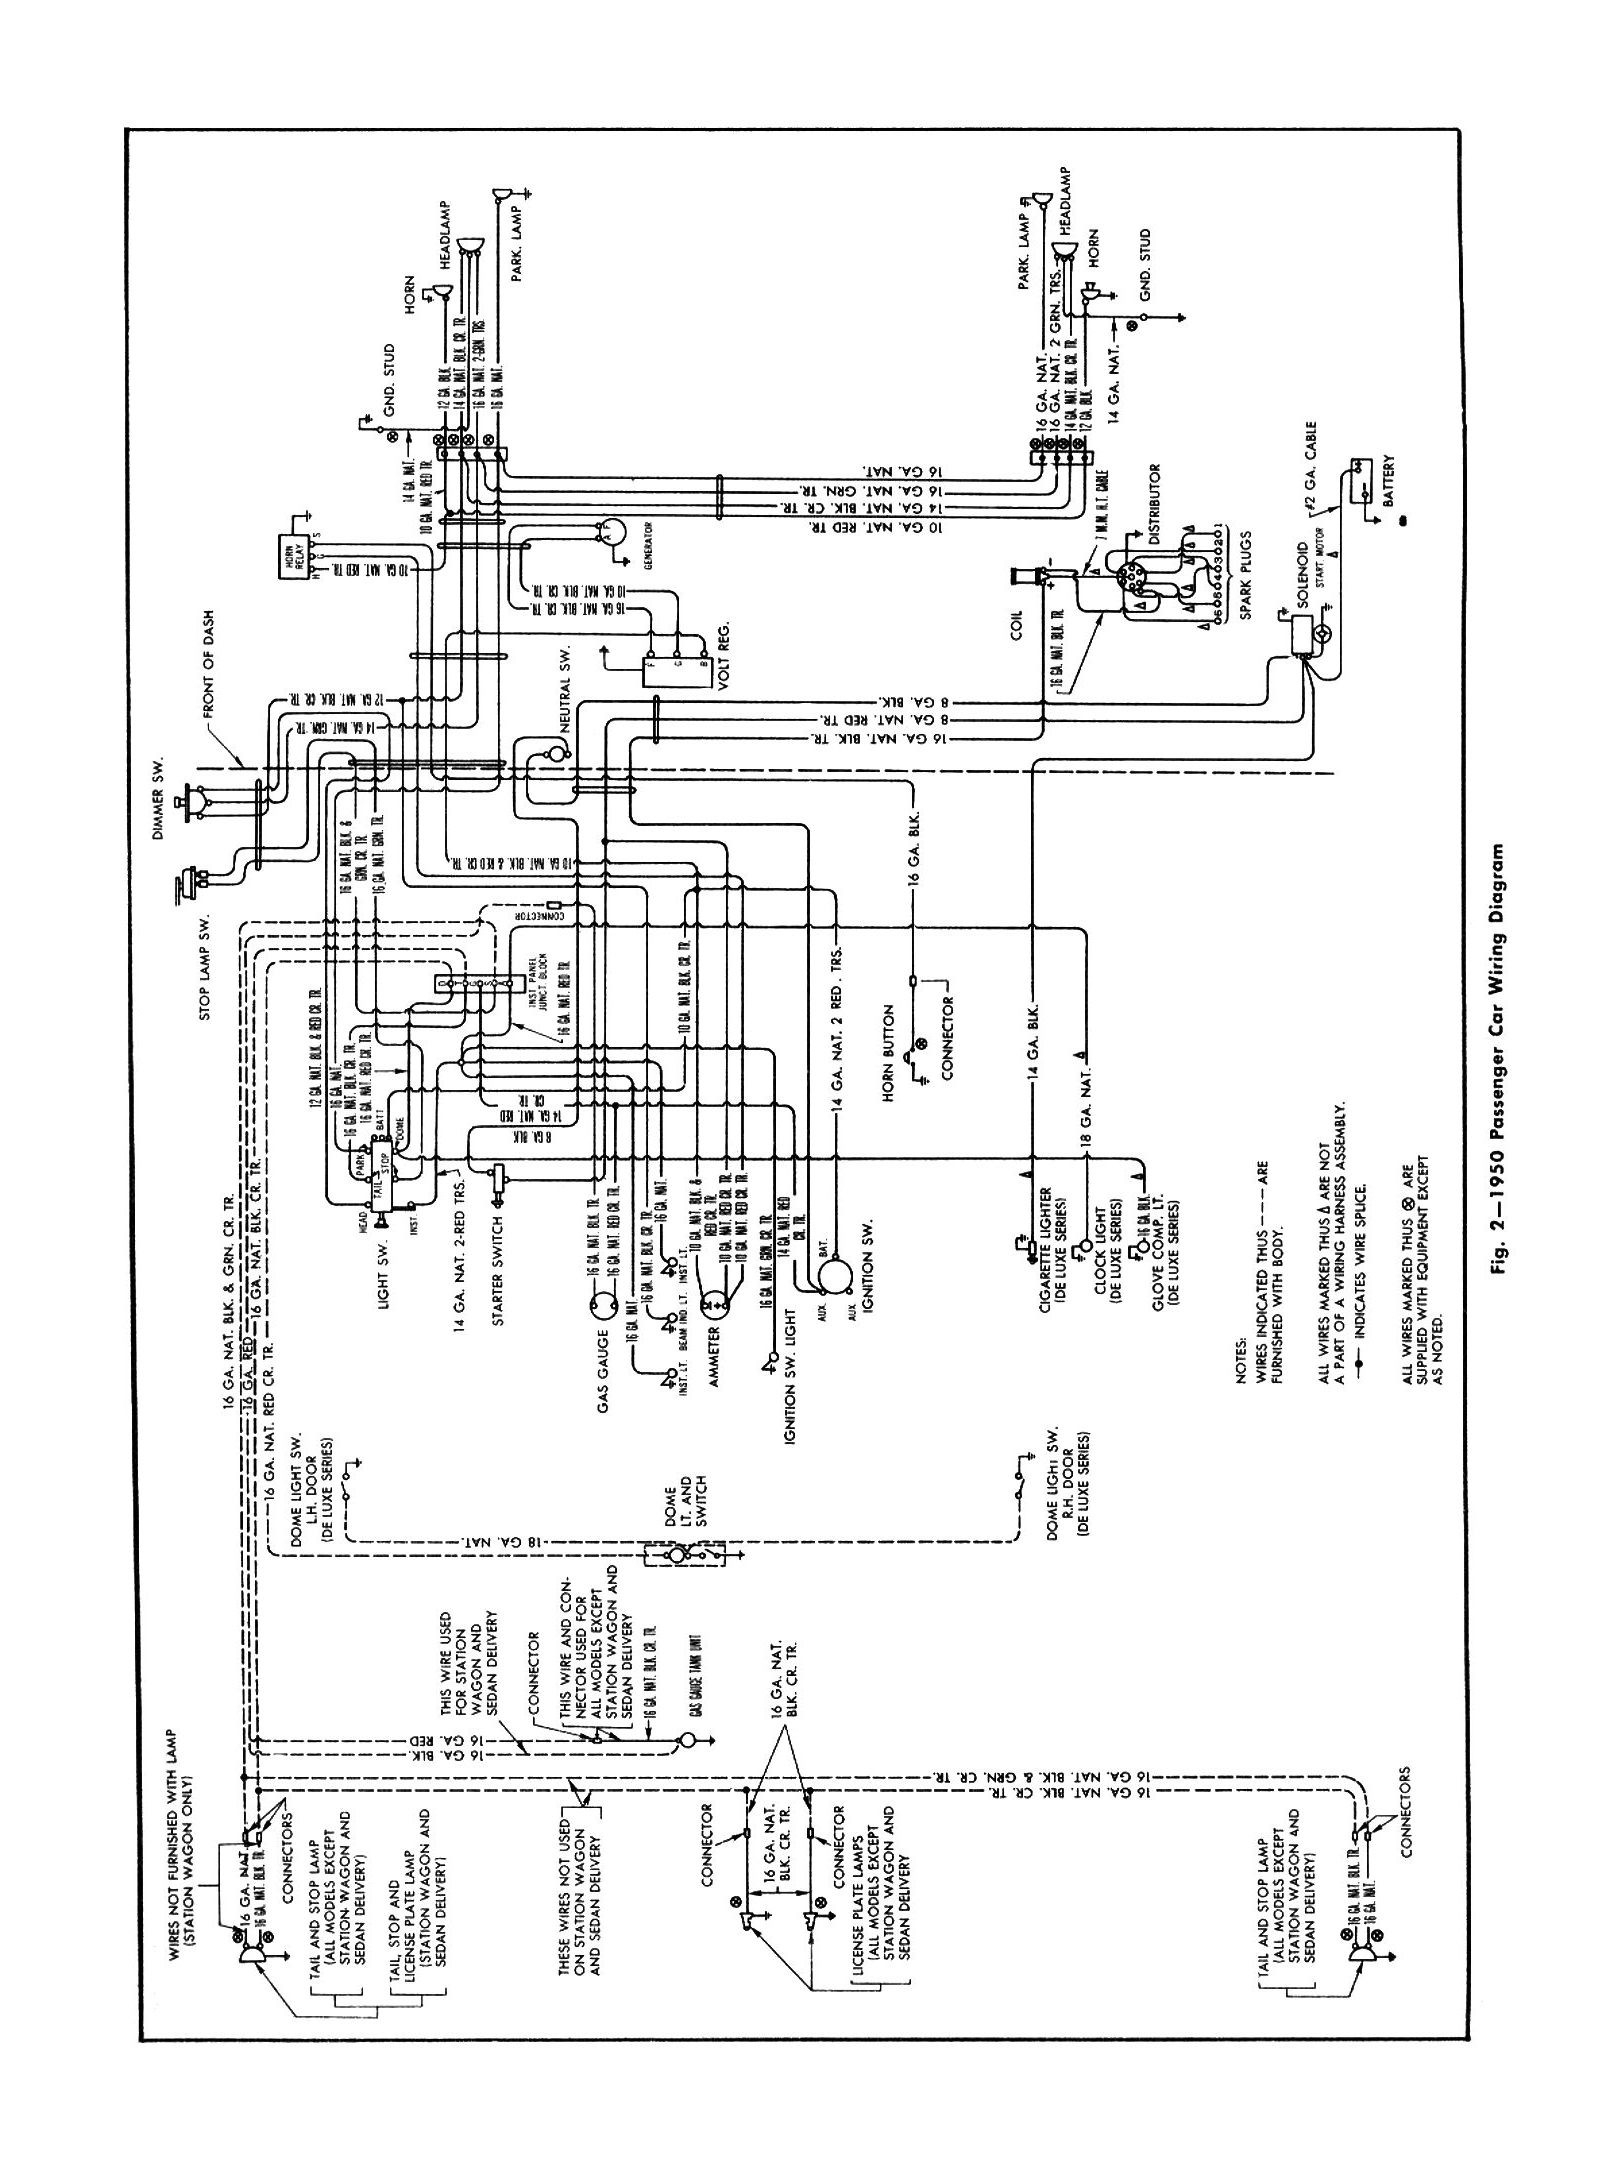 Chevy Wiring Diagrams - Chevy Wiring Harness Diagram